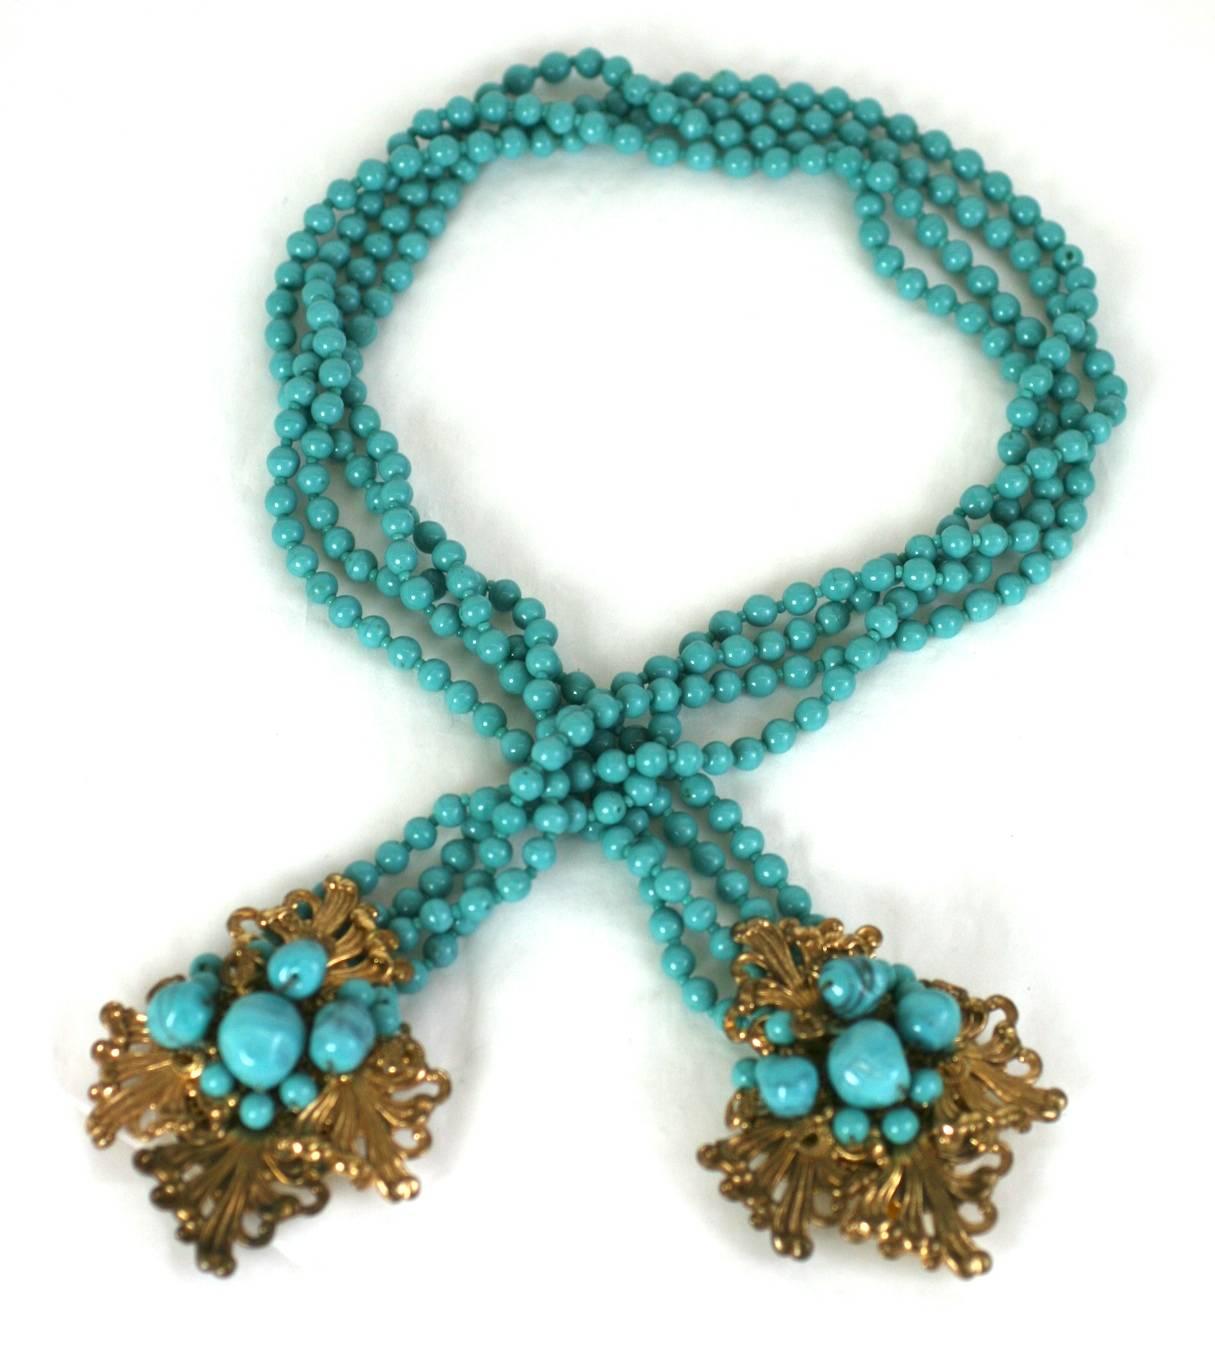 Miriam Haskell early Turquoise Pate de Verre Wrap Lariat from the late 1930's. These lovely lariats have clip fittings on the ends, which were originally designed to be attached to dress necklines in different configurations. Often the lariat was